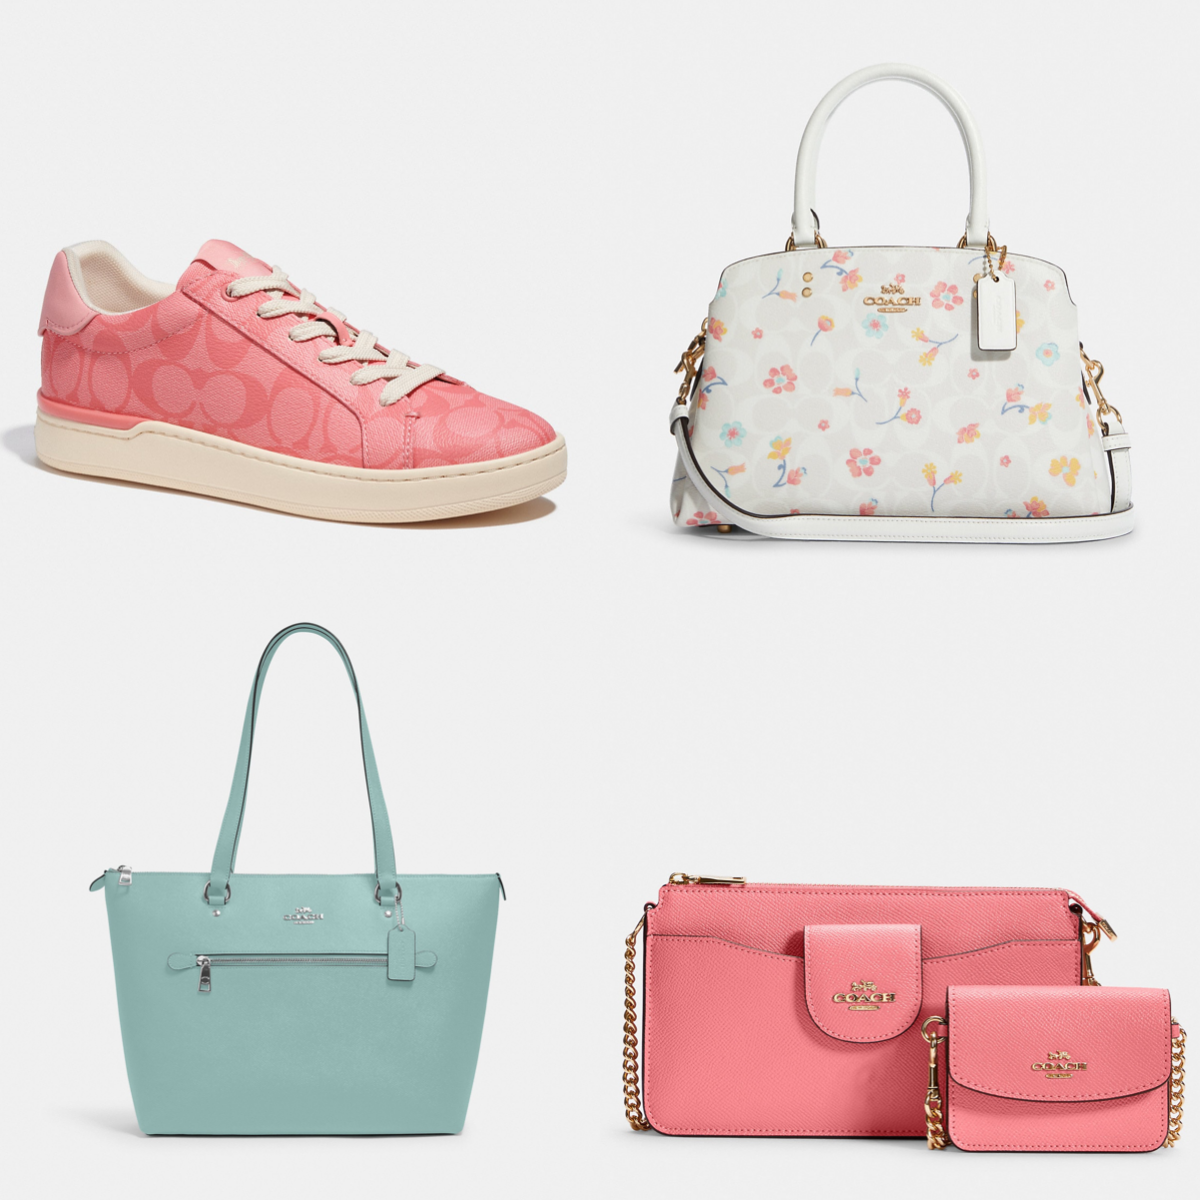 The new Coach bags: The coolest colorblock for spring - Cool Mom Picks